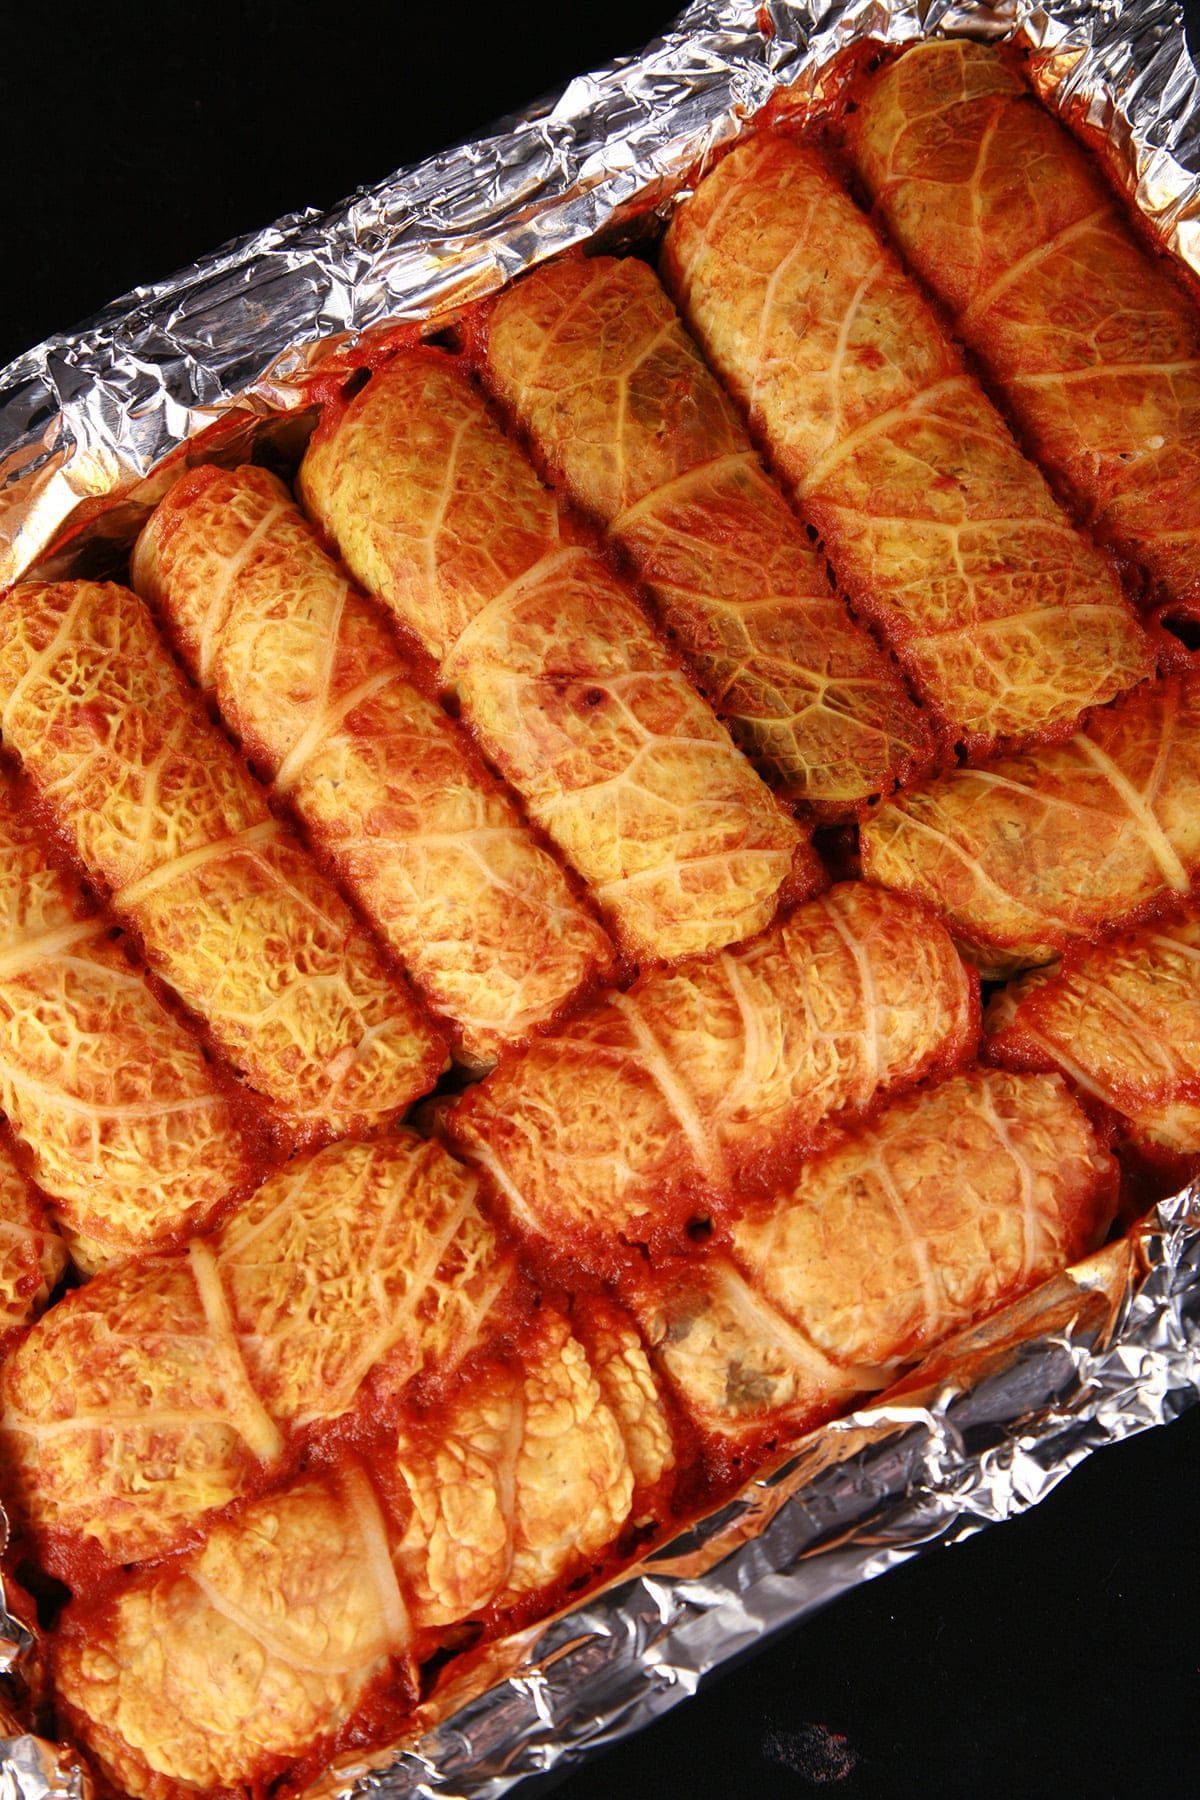 A close up view of a pan of V* covered cabbage rolls.